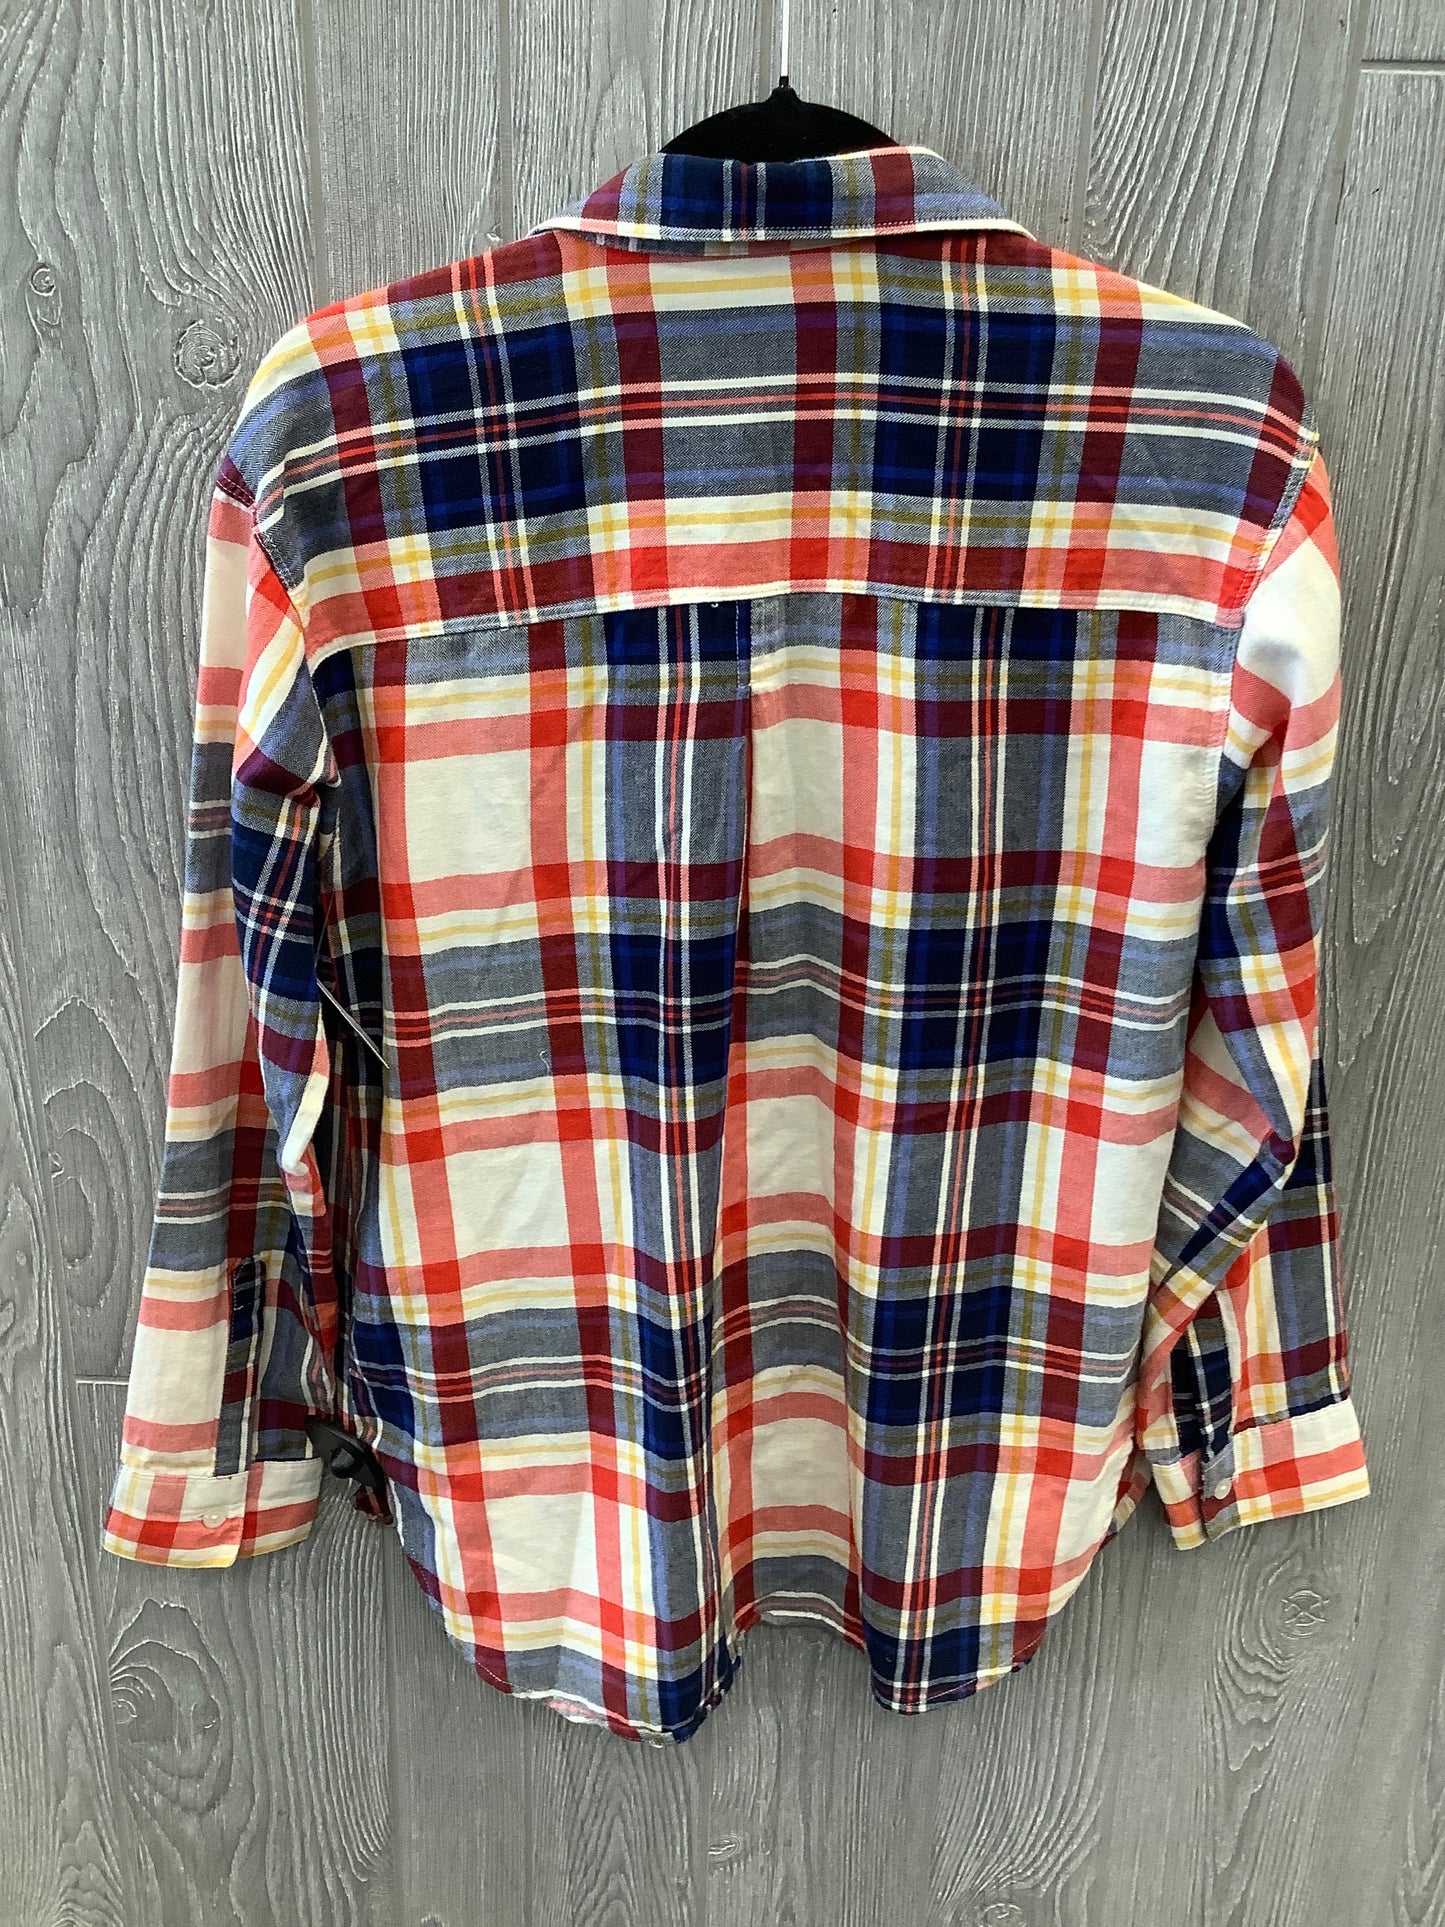 Plaid Pattern Top Long Sleeve Old Navy, Size S